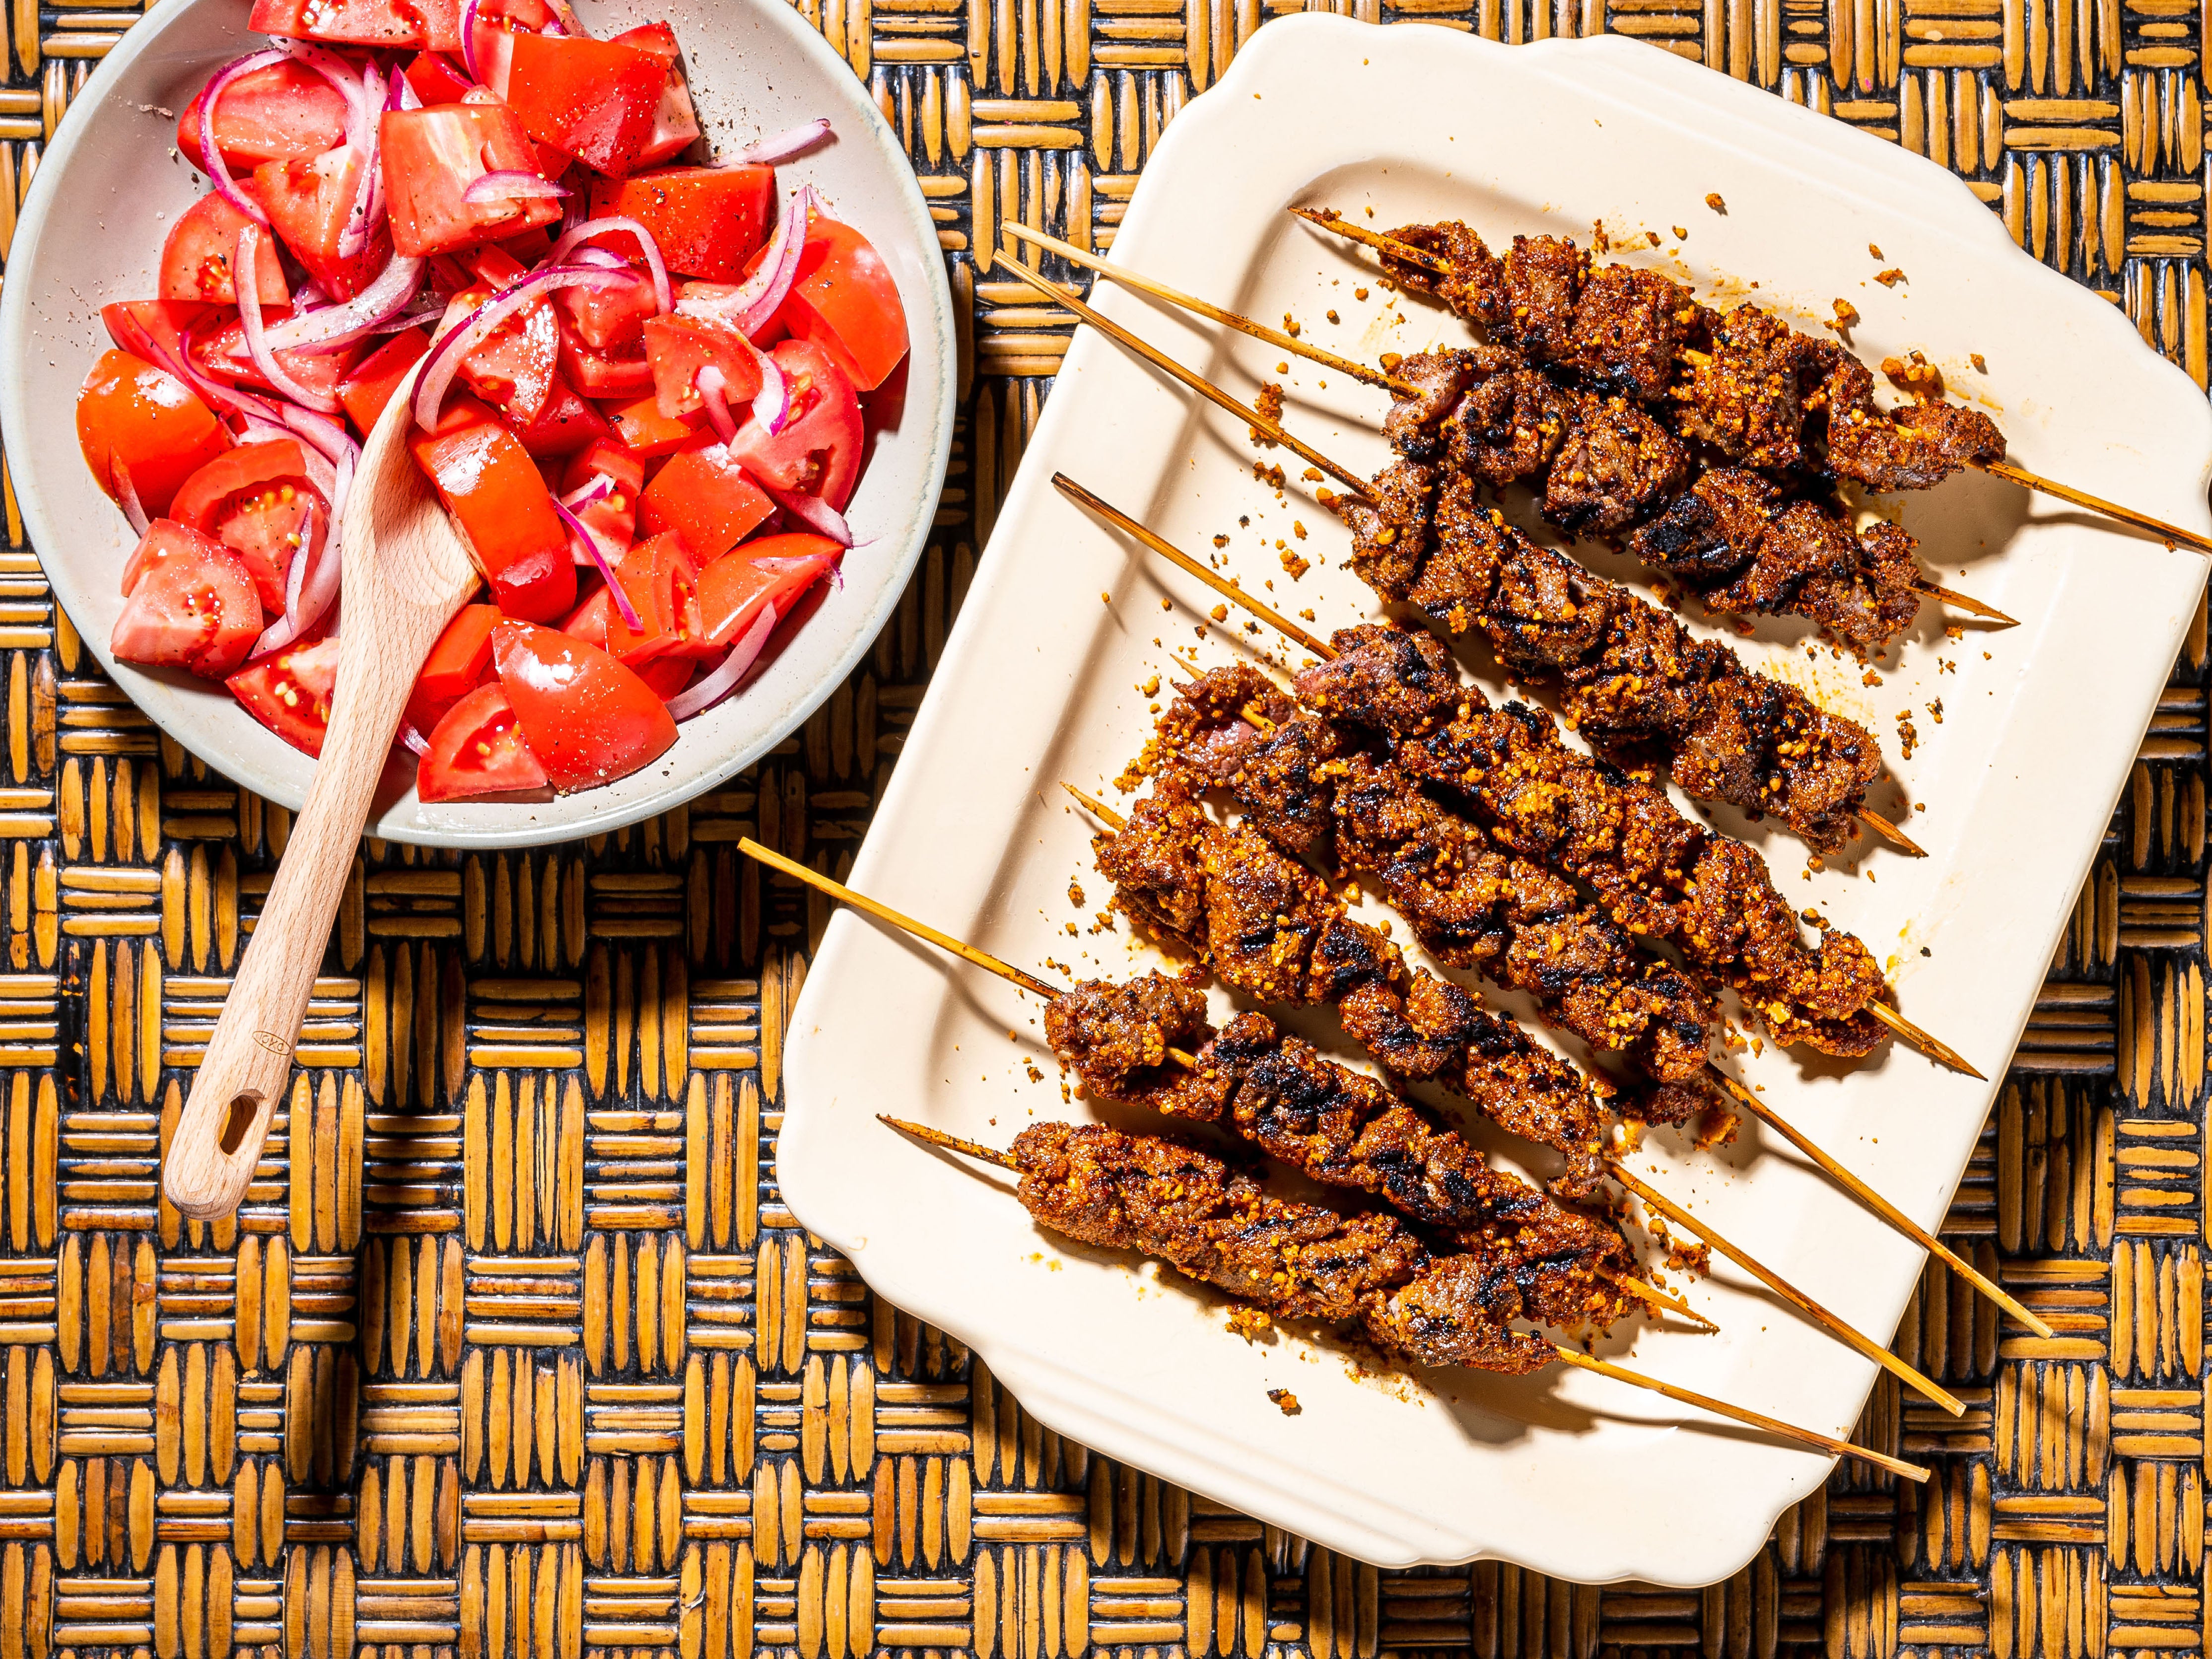 Suya is not for those who prefer delicate, subtle flavours